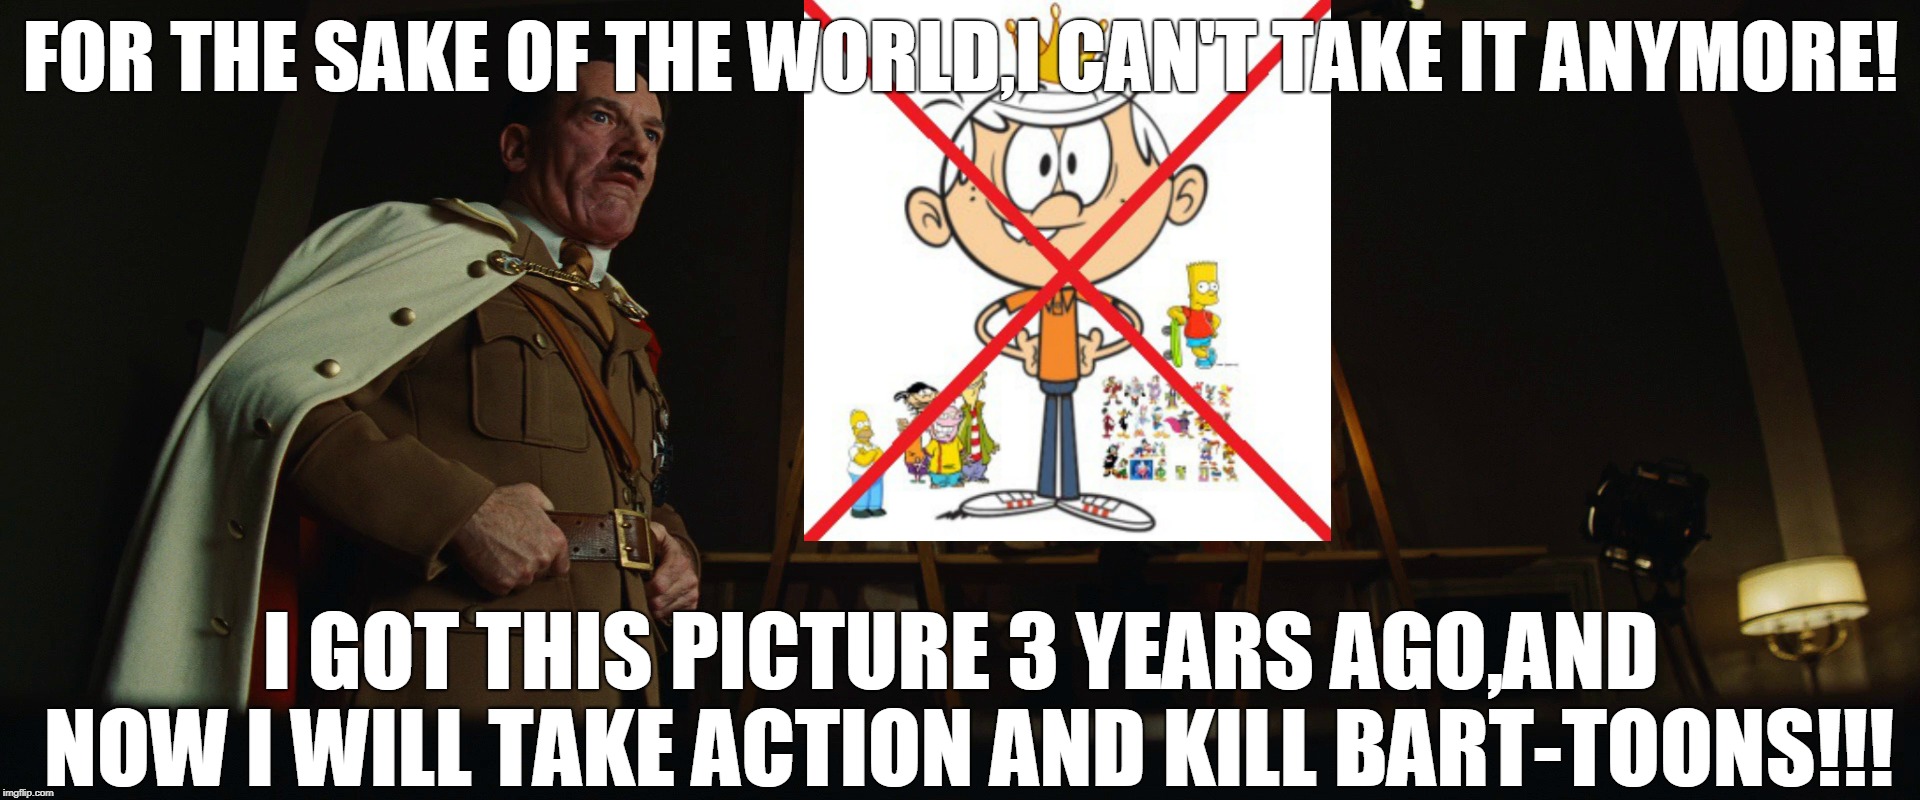 Adolf Hitler Hates Bart-Toons | FOR THE SAKE OF THE WORLD,I CAN'T TAKE IT ANYMORE! I GOT THIS PICTURE 3 YEARS AGO,AND NOW I WILL TAKE ACTION AND KILL BART-TOONS!!! | image tagged in the loud house,memes,adolf hitler,inglourious basterds,nazi,bart-toons | made w/ Imgflip meme maker